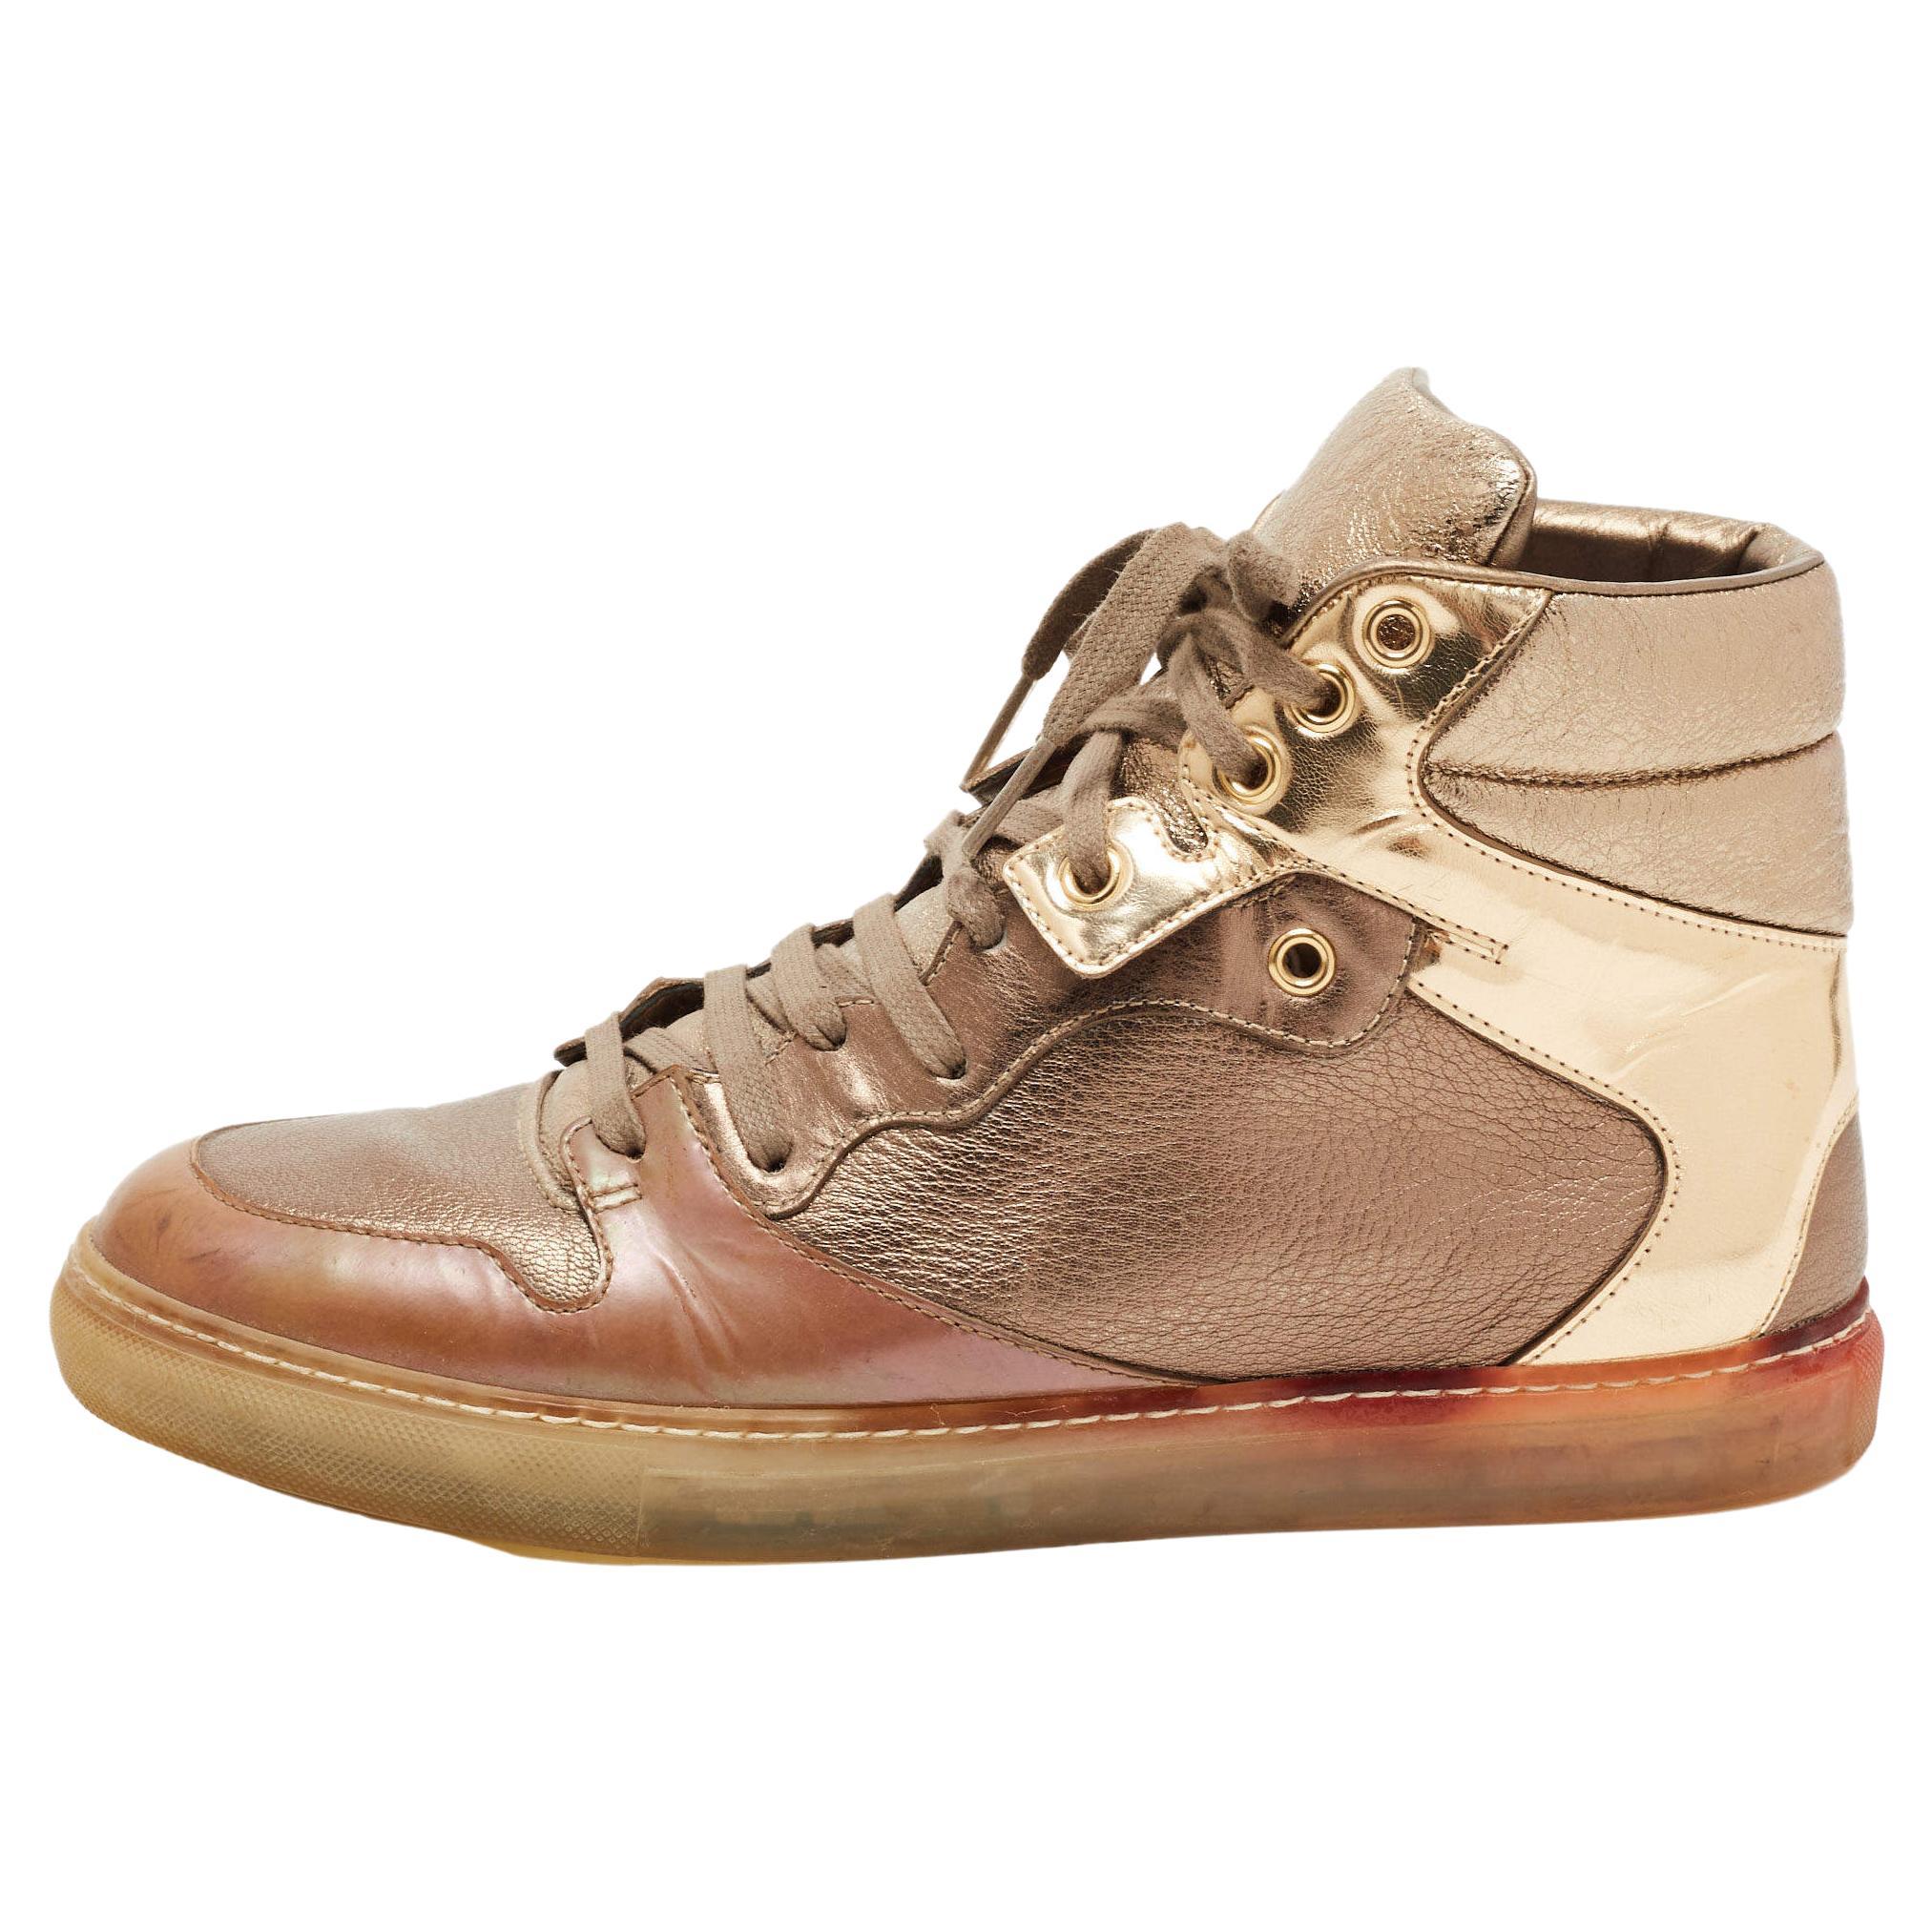 Balenciaga Metallic Tricolor Leather High Top Sneakers Size 40 For Sale